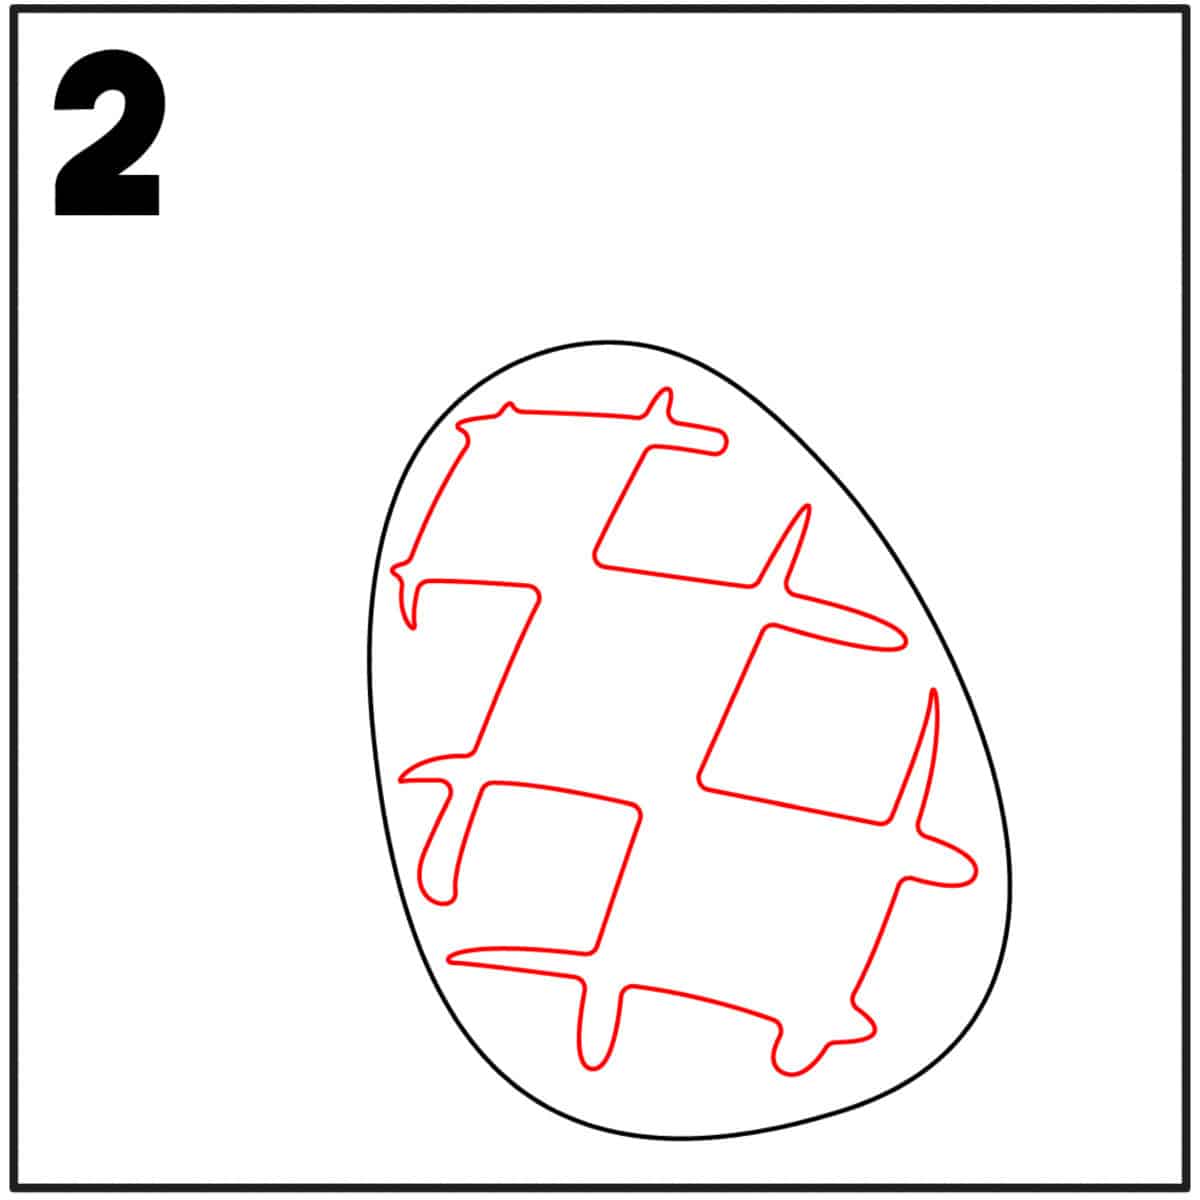 step 2 draw the cross bars to the inside of the pineapple